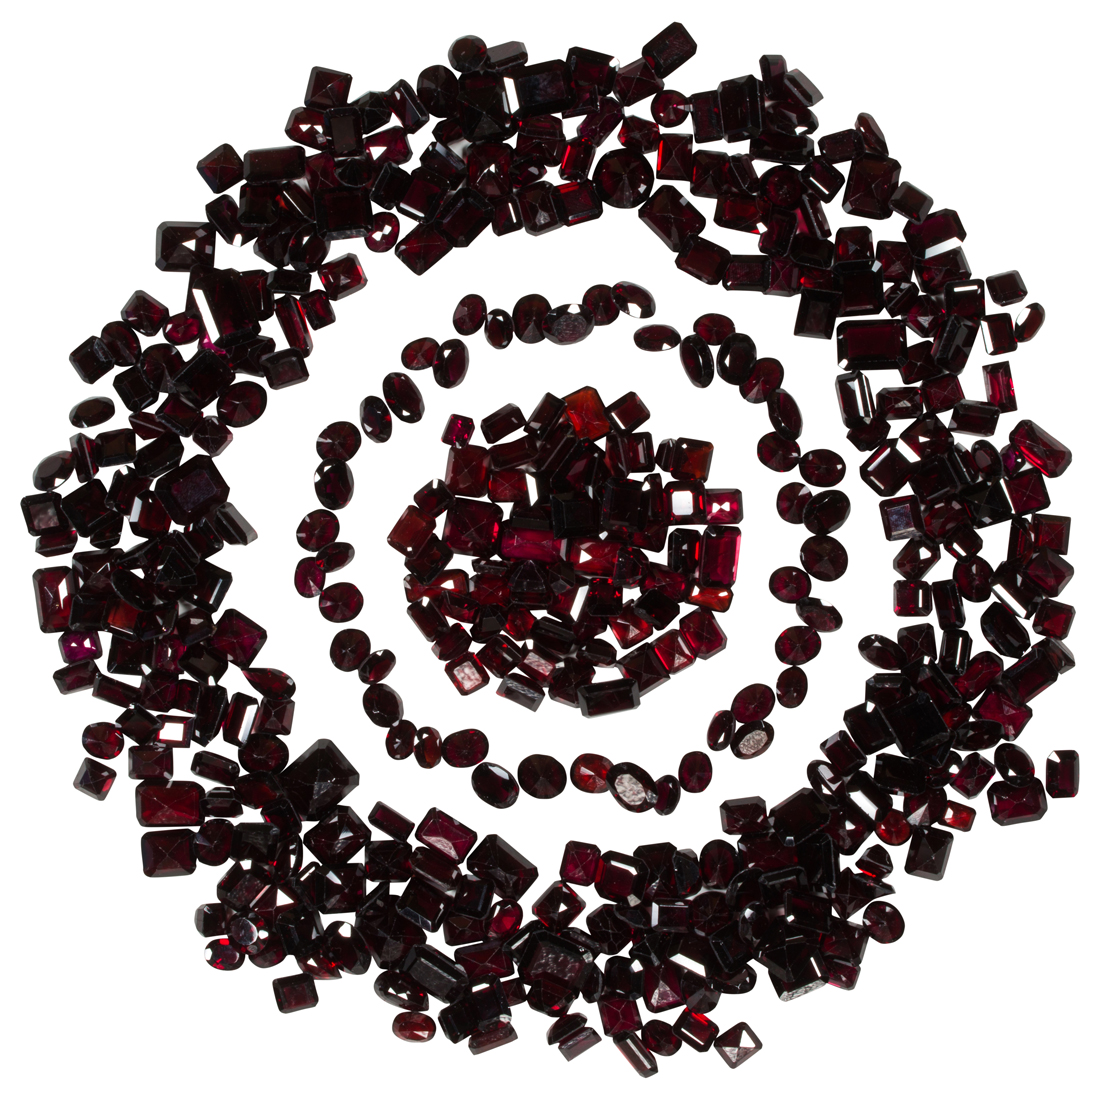 A GROUP OF UNMOUNTED GARNETS A 3cdee4